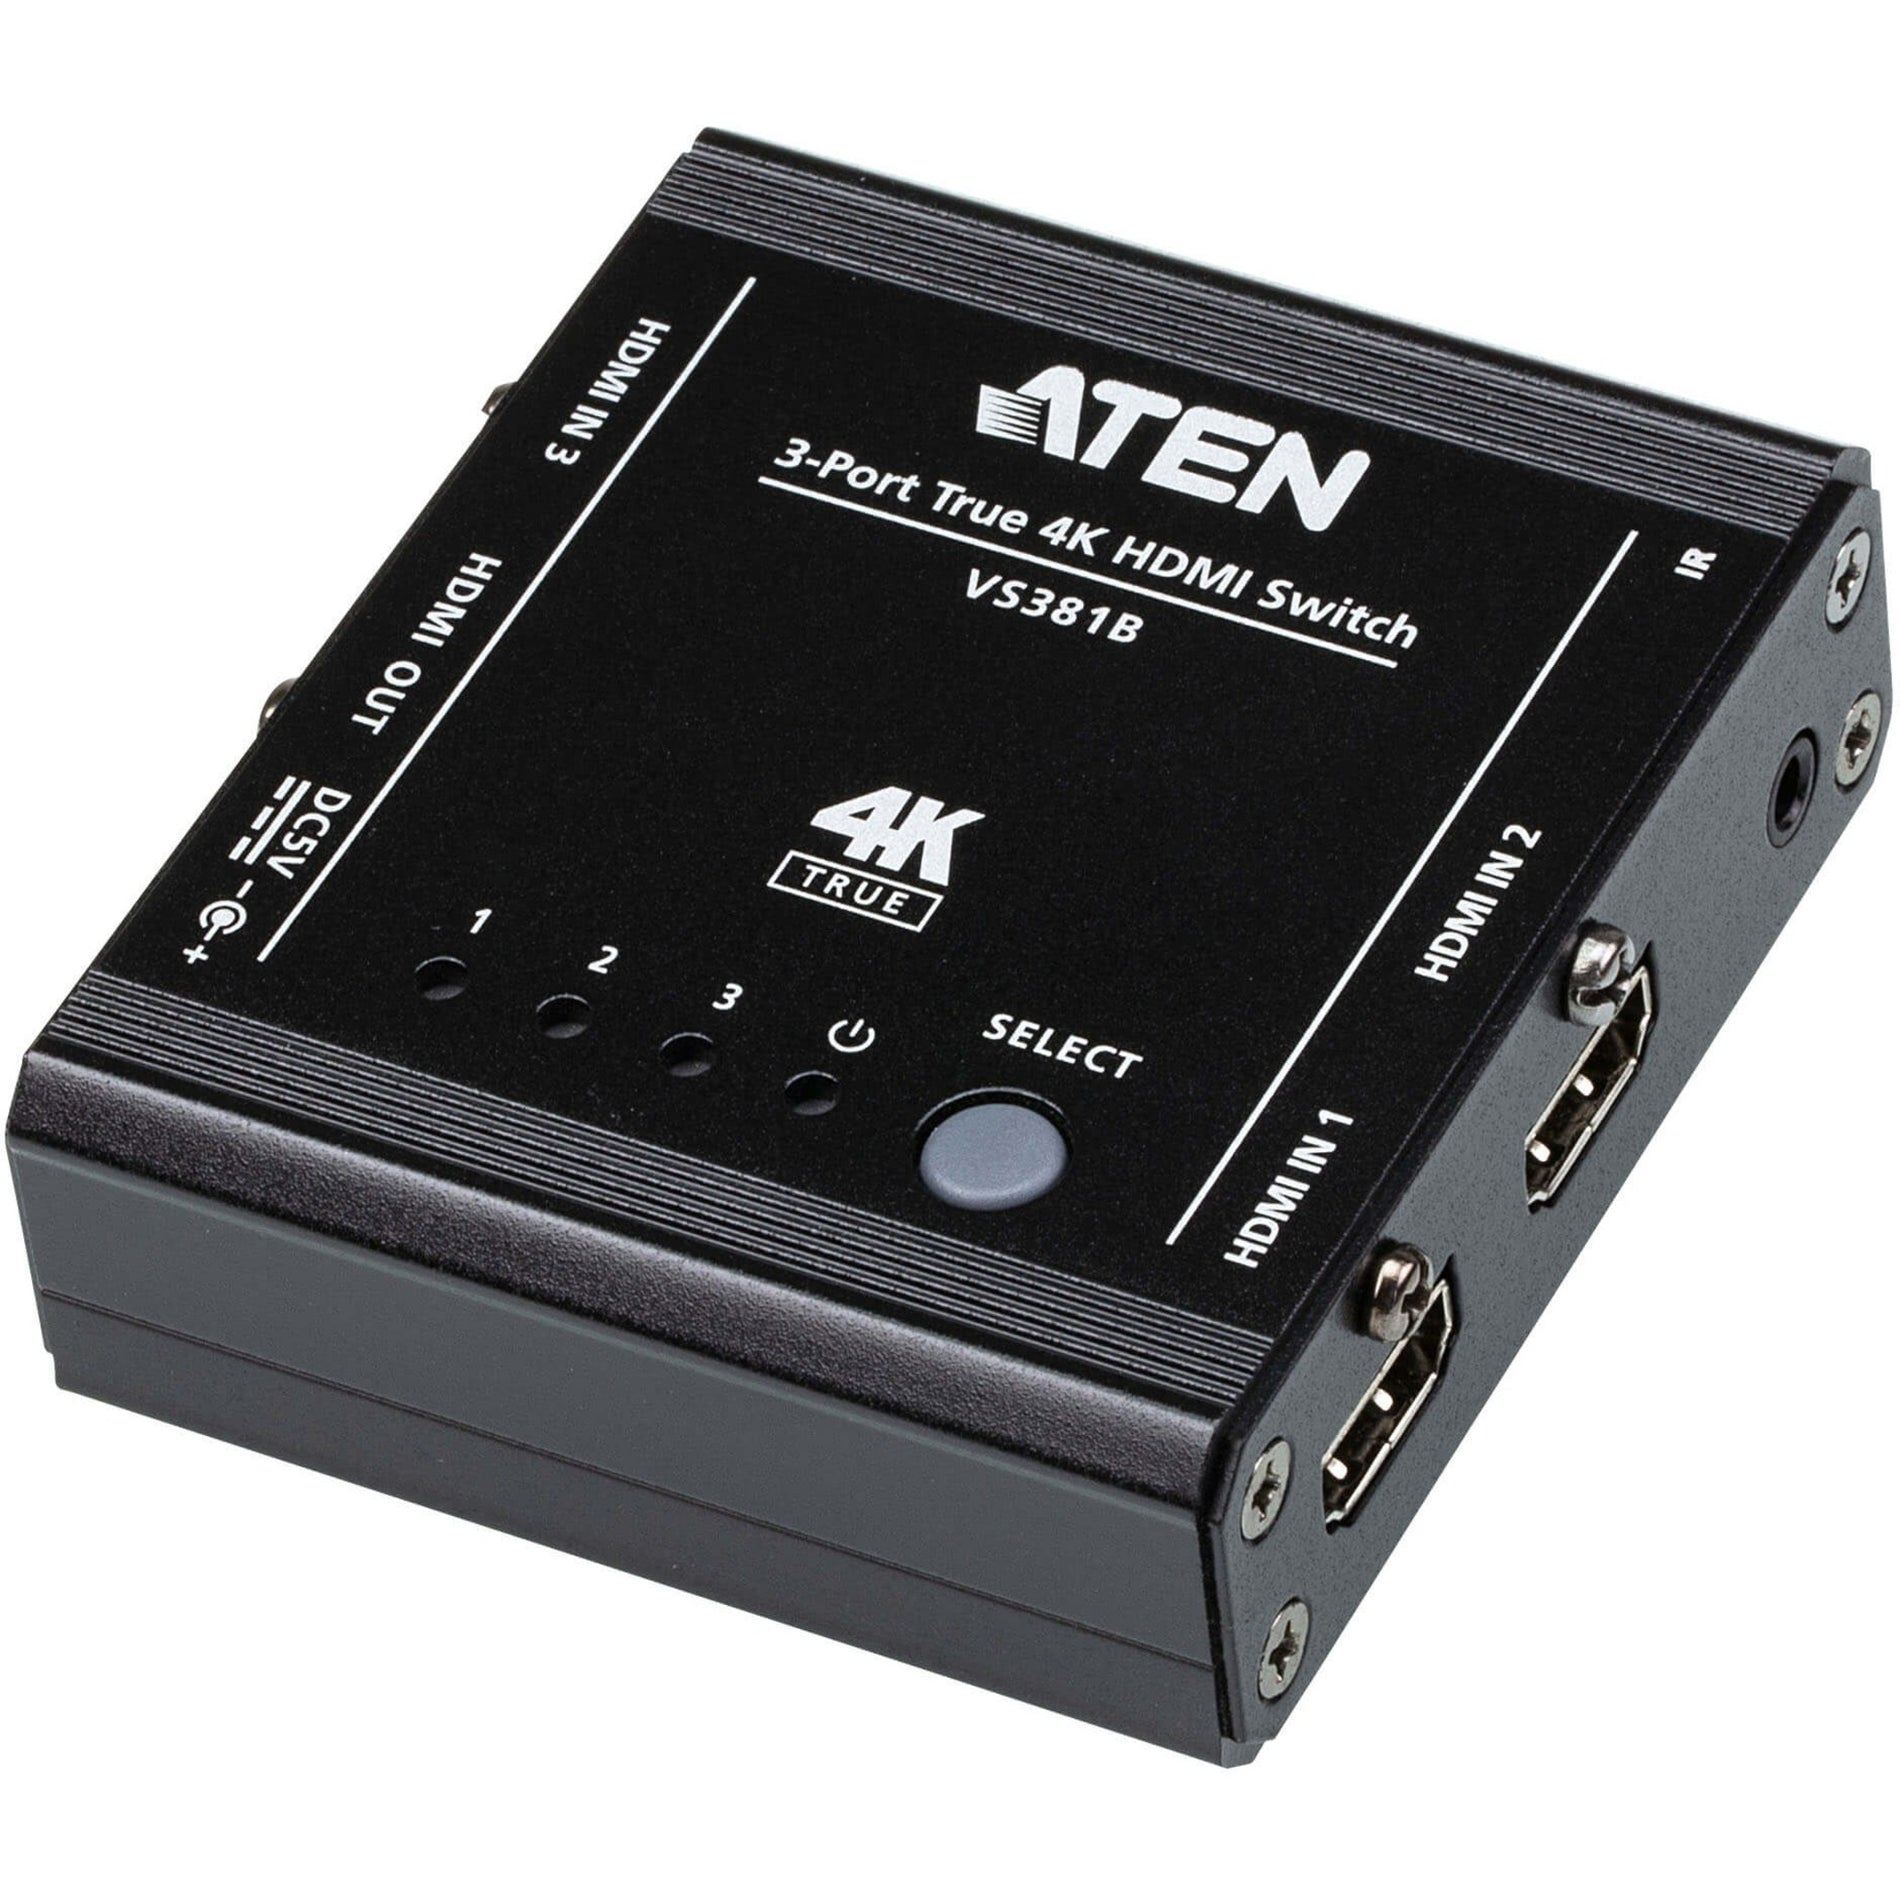 ATEN VS381B 3-Port True 4K HDMI Switch, Ultra HD Video Switchbox for Easy Display Connectivity